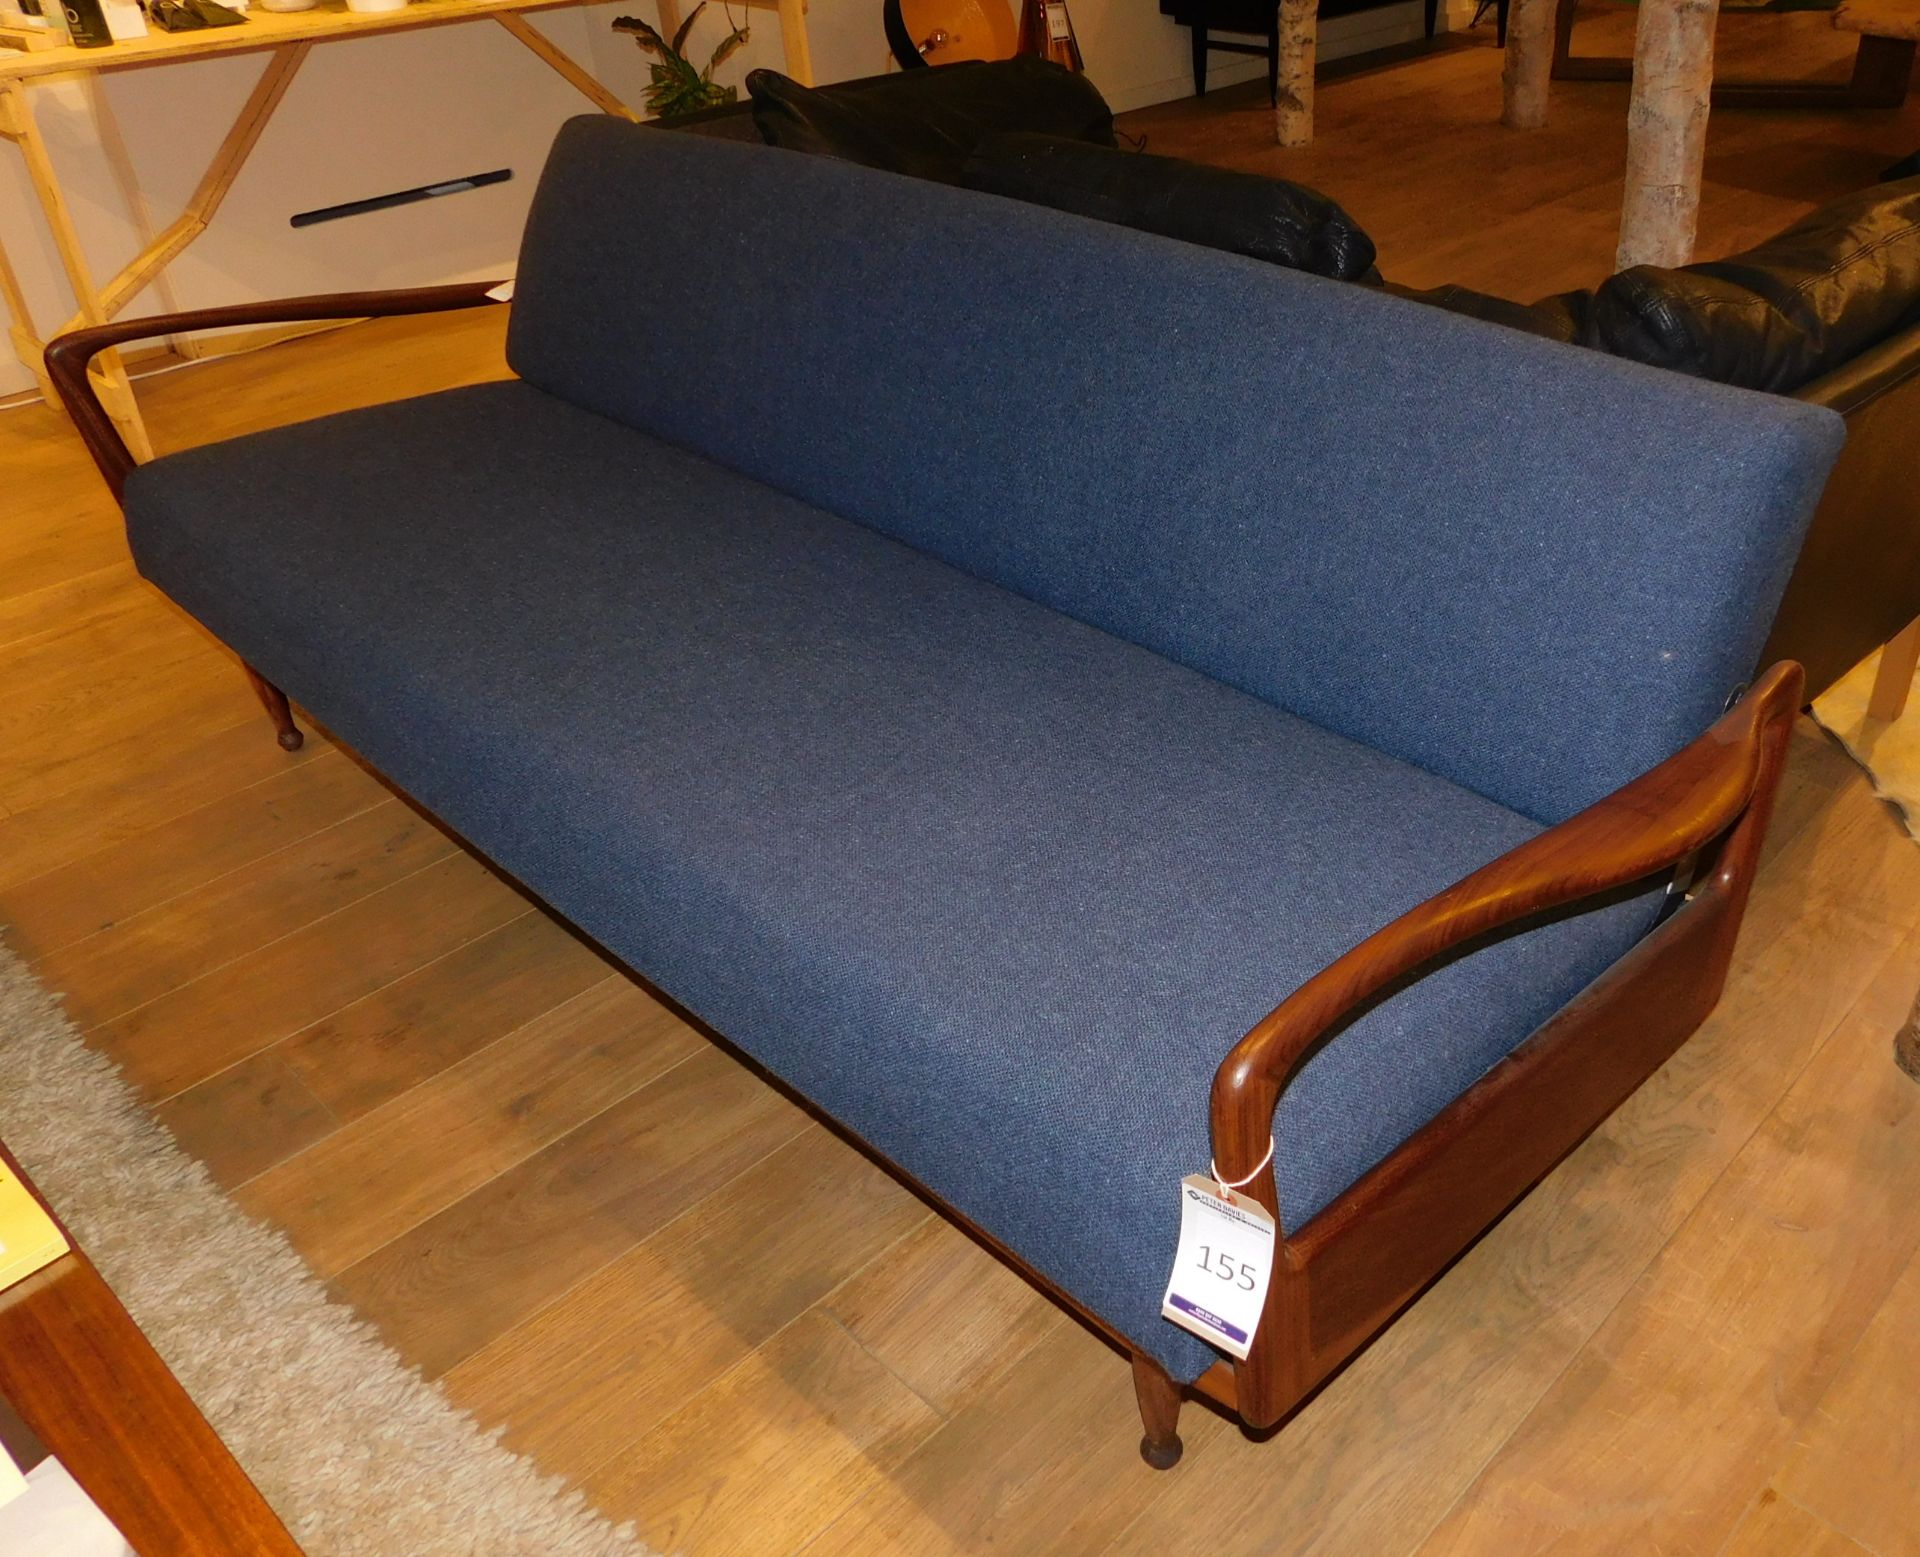 1950’s Style Teak Effect Framed Bed Settee With Shaped Arms (Retail £4,500) (Located at 155 - Image 2 of 3